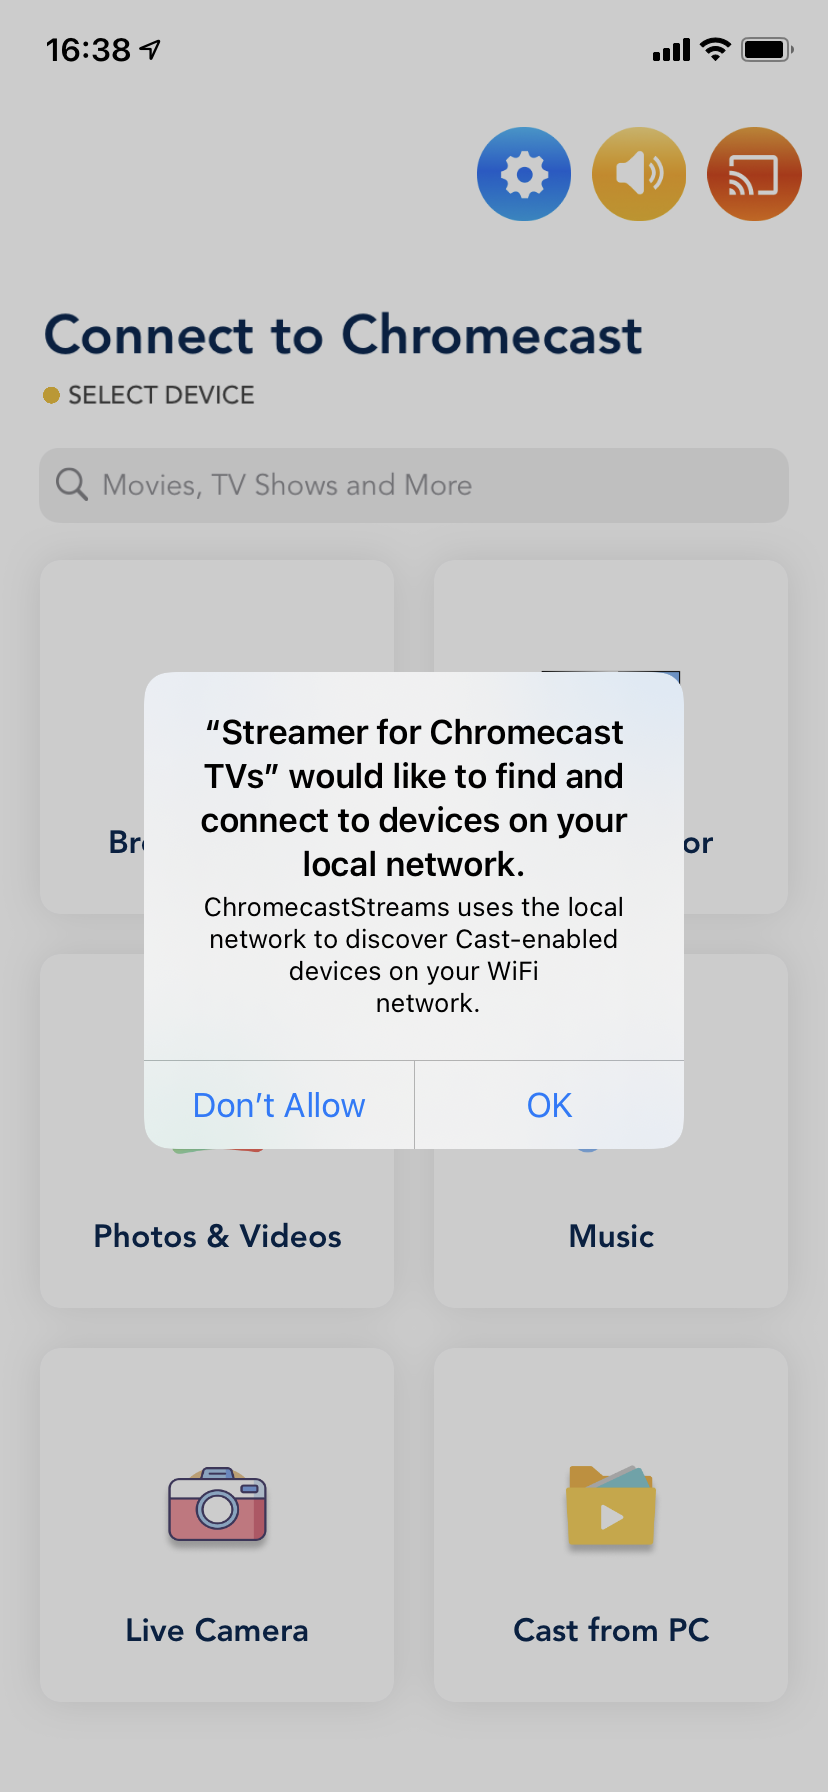 Allow the app to find and connect to devices